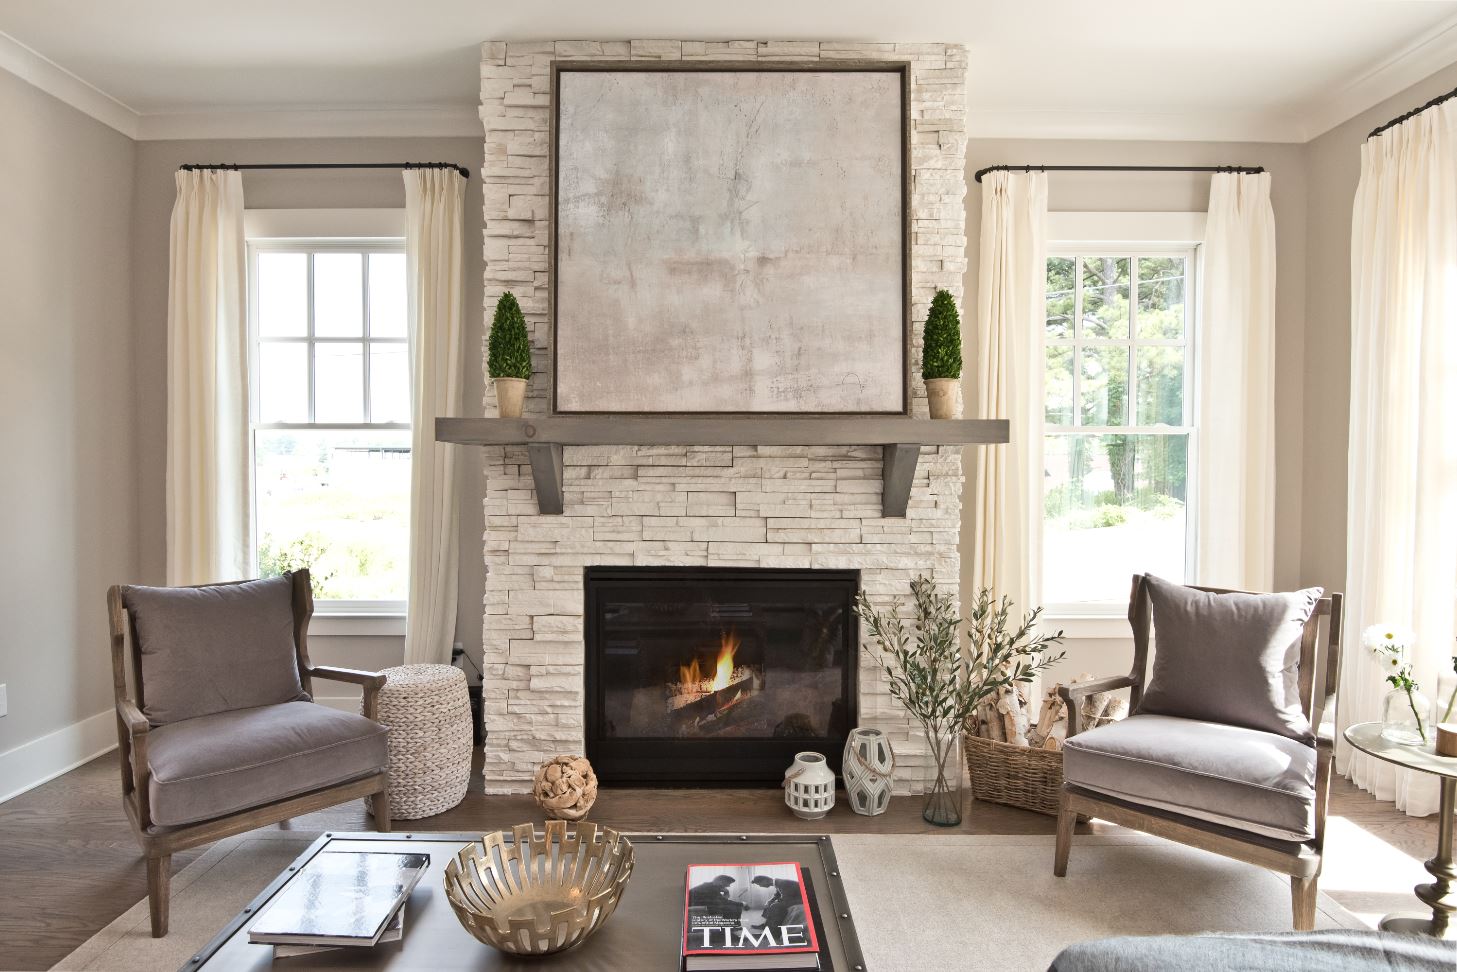 Stone and wood are a timeless design option when choosing the fireplace that's right for your new Brock Built home.